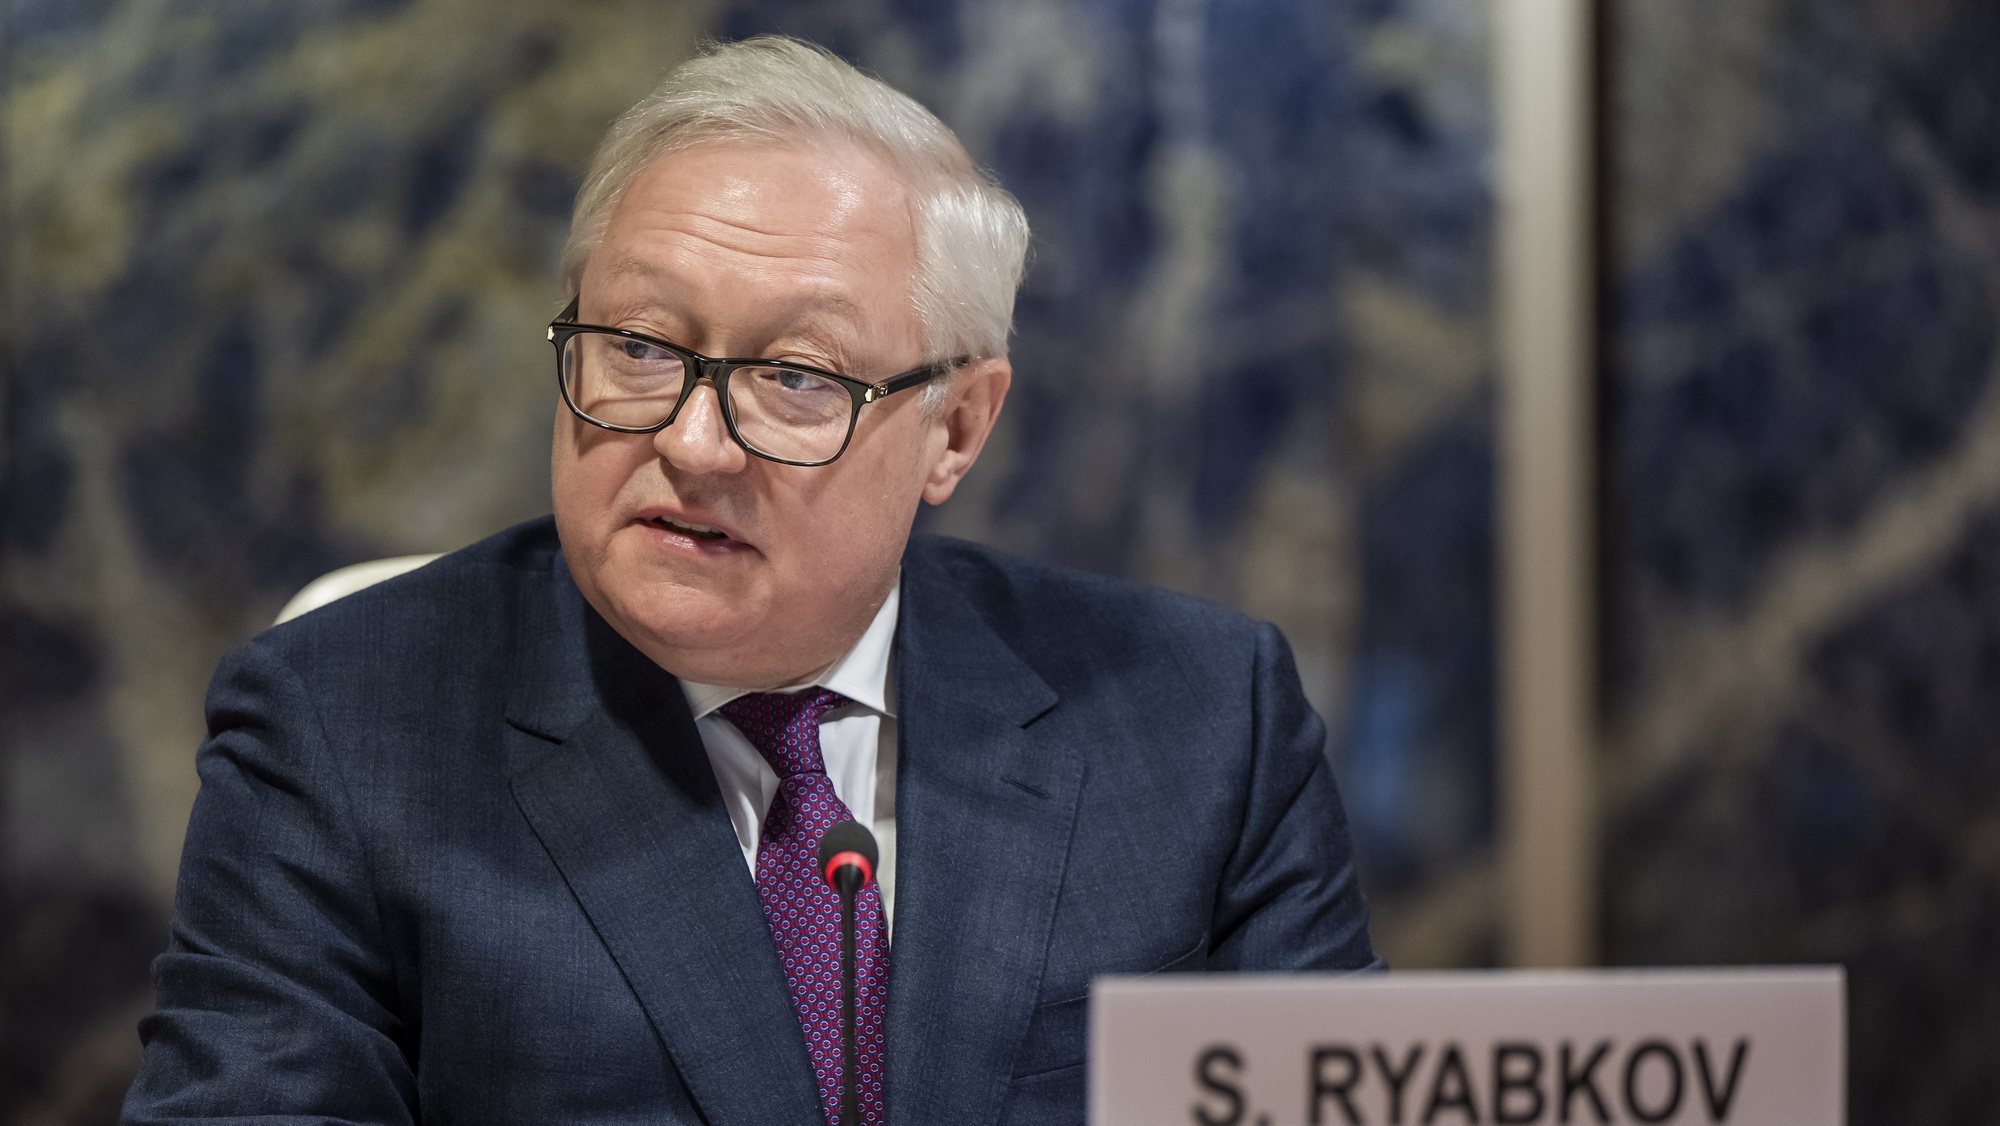 epa10498429 Deputy Minister of Foreign Affairs of the Russian Federation Sergei Ryabkov delivers his speech during a session of the Conference on Disarmament at the European headquarters of the United Nations in Geneva, Switzerland, 02 March 2023.  EPA/MARTIAL TREZZINI